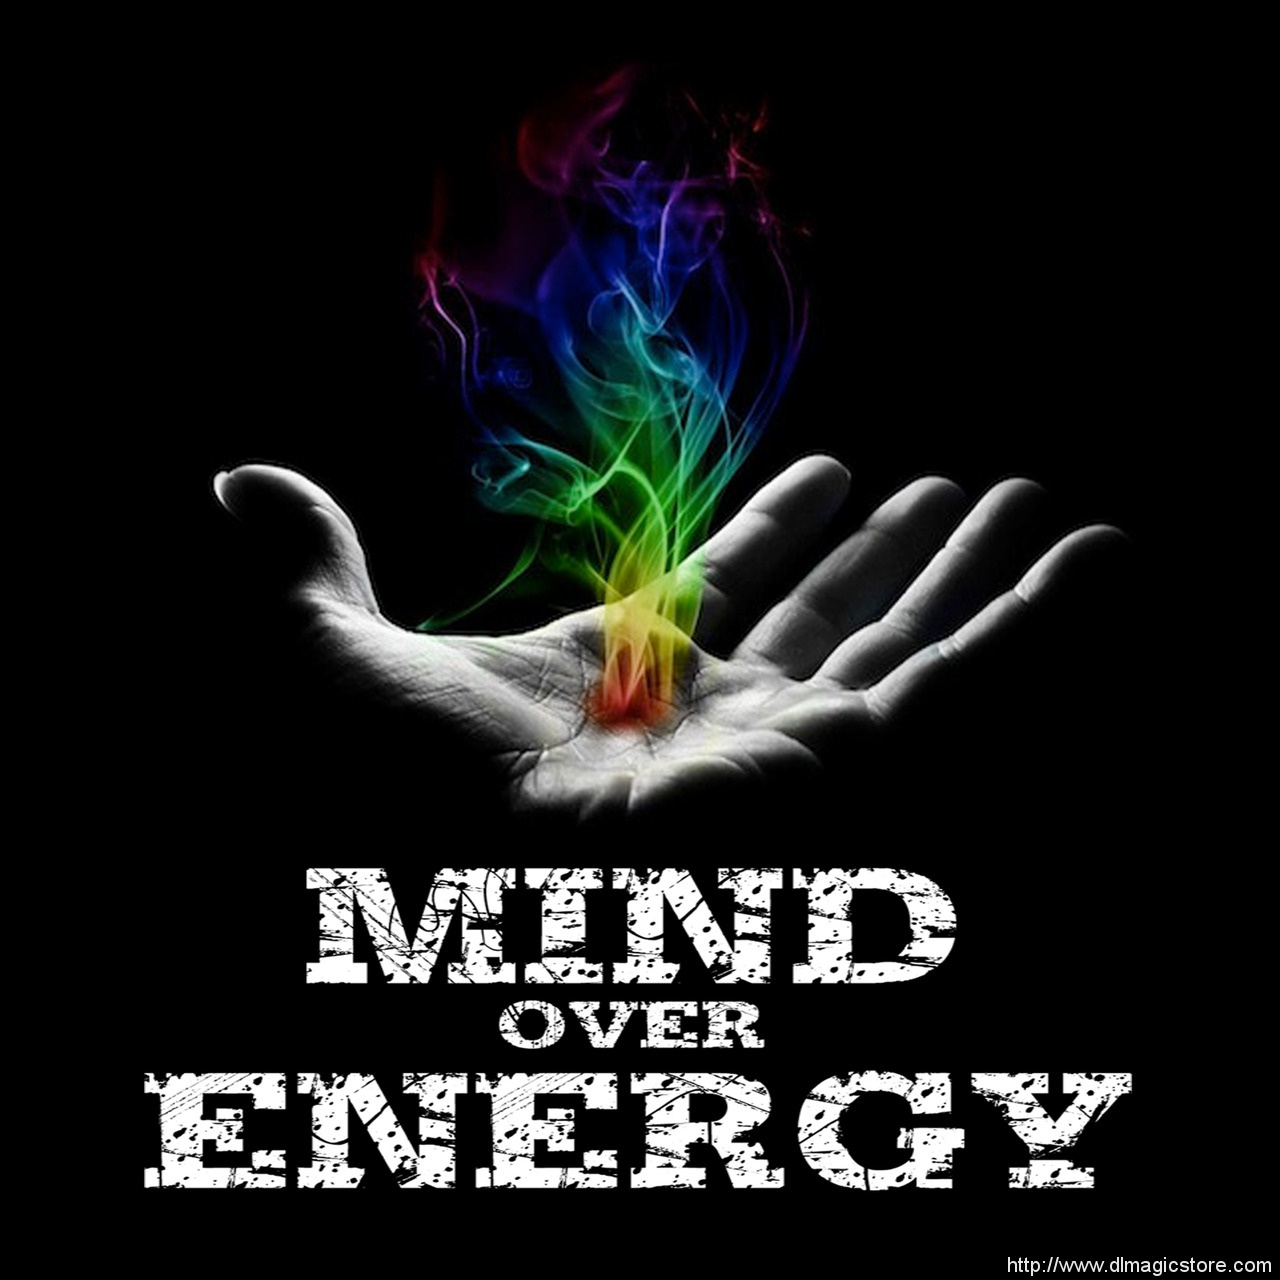 Mind Over Energy (eBook Pack) by Mauro Santelices (Instant Download)